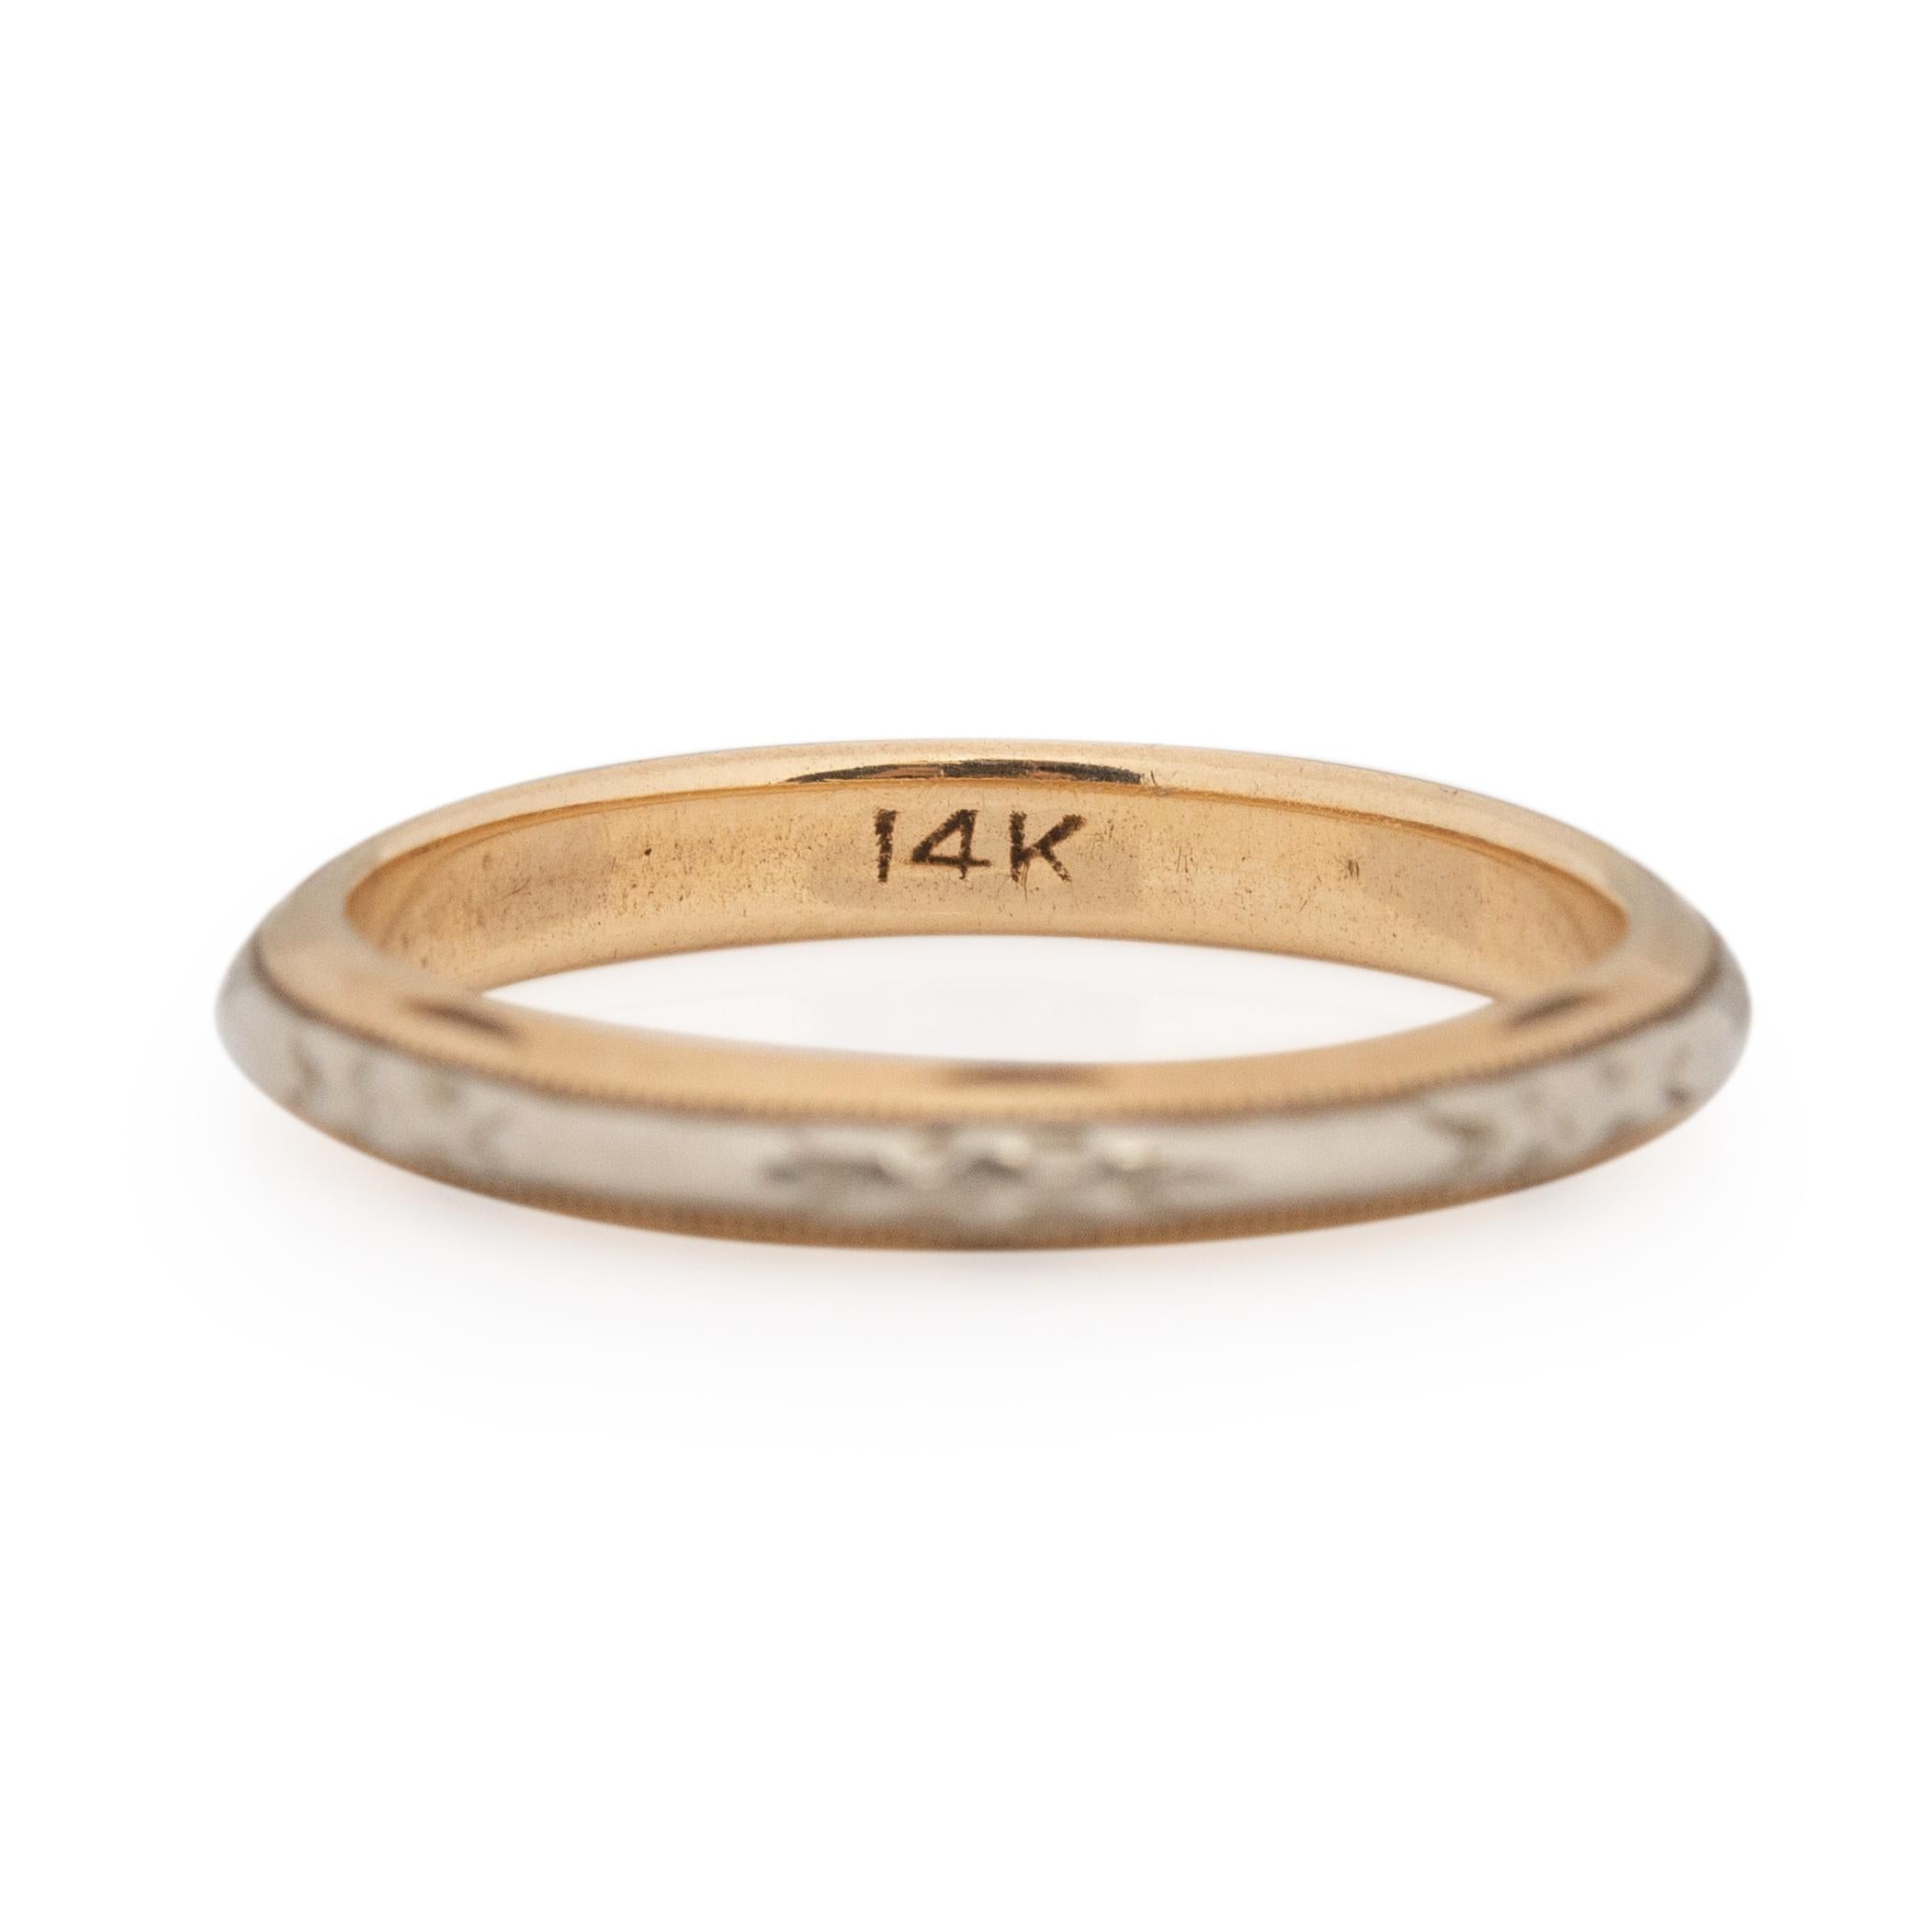 This two tone band is crafted in 14K white and yellow gold. The base of the ring is yellow gold along the center, raised in to the knife edge is a white gold strip that has an elegant embossed design. The knife edge gives this ring a thin and tall